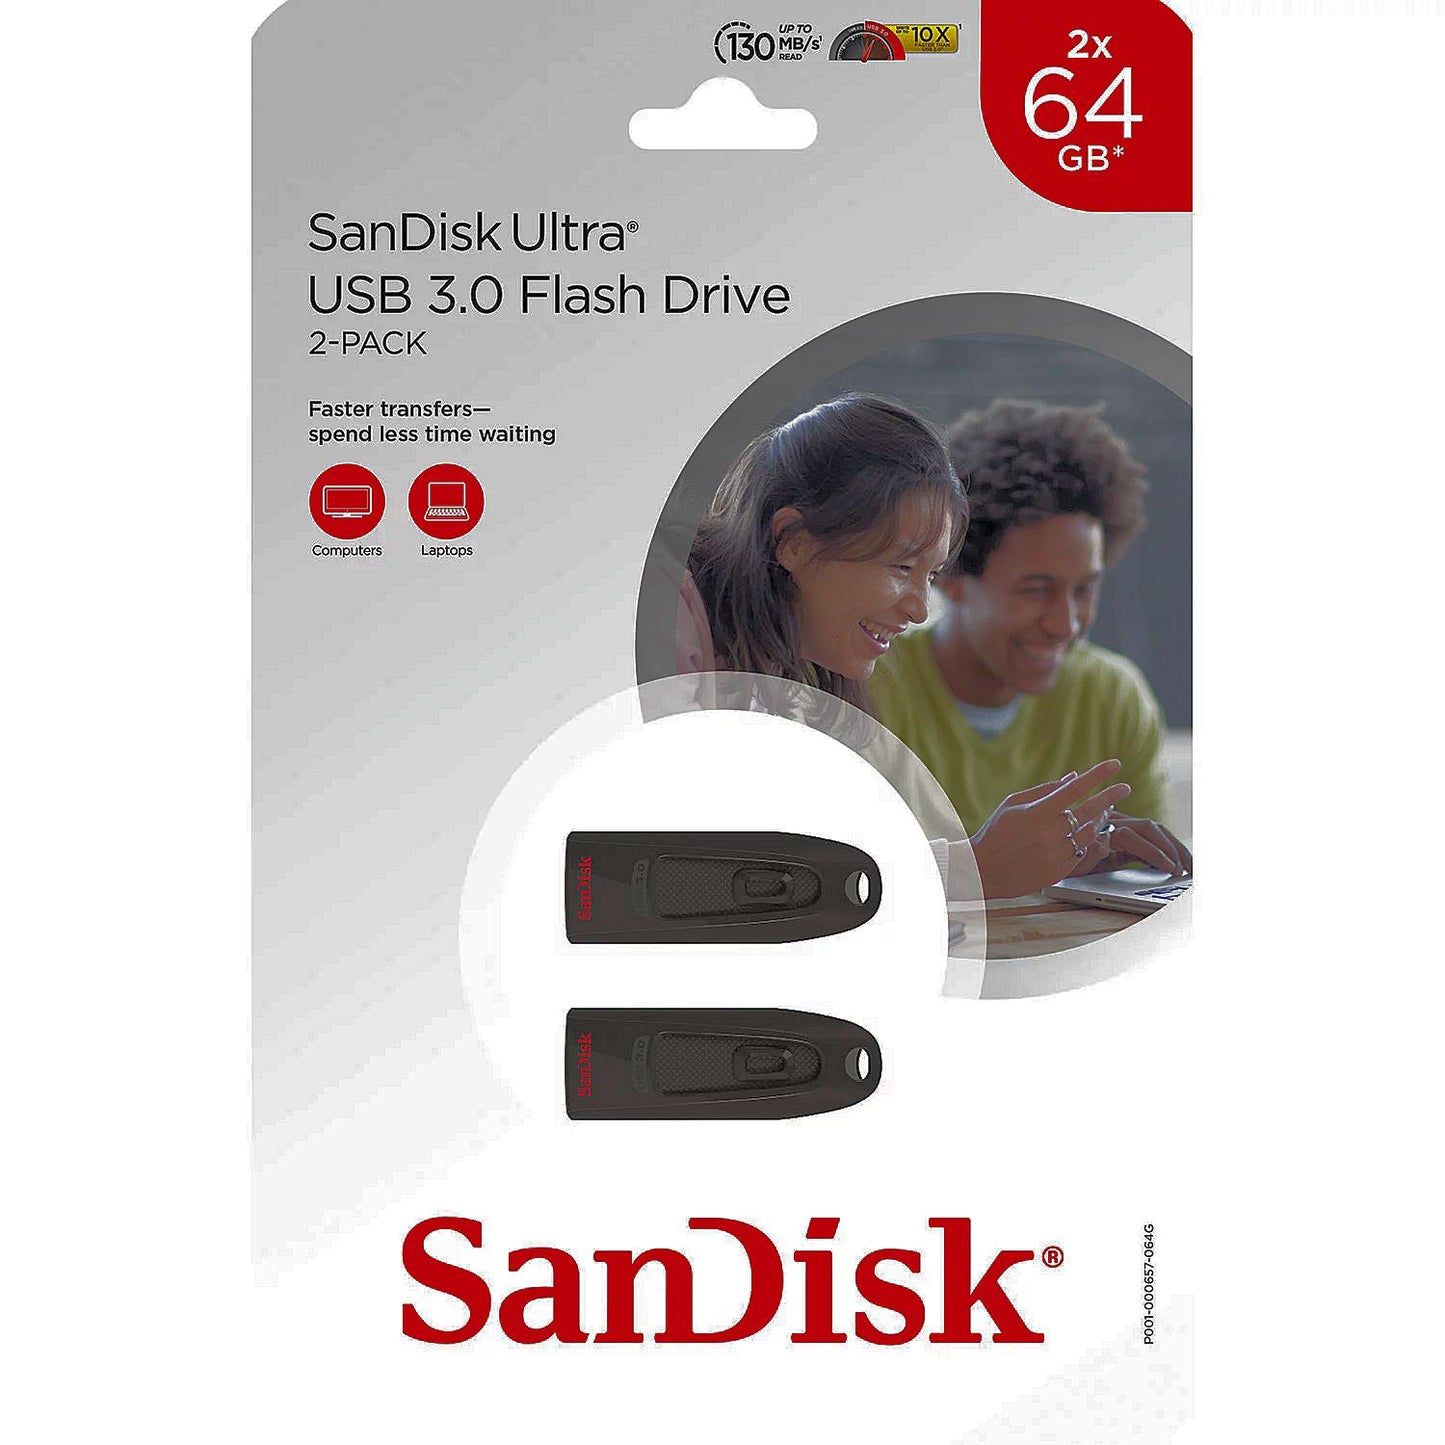 SanDisk 64GB Ultra USB 3.0 Flash Drive (2 Pack) Secure Encryption 130MB/s Read Speed